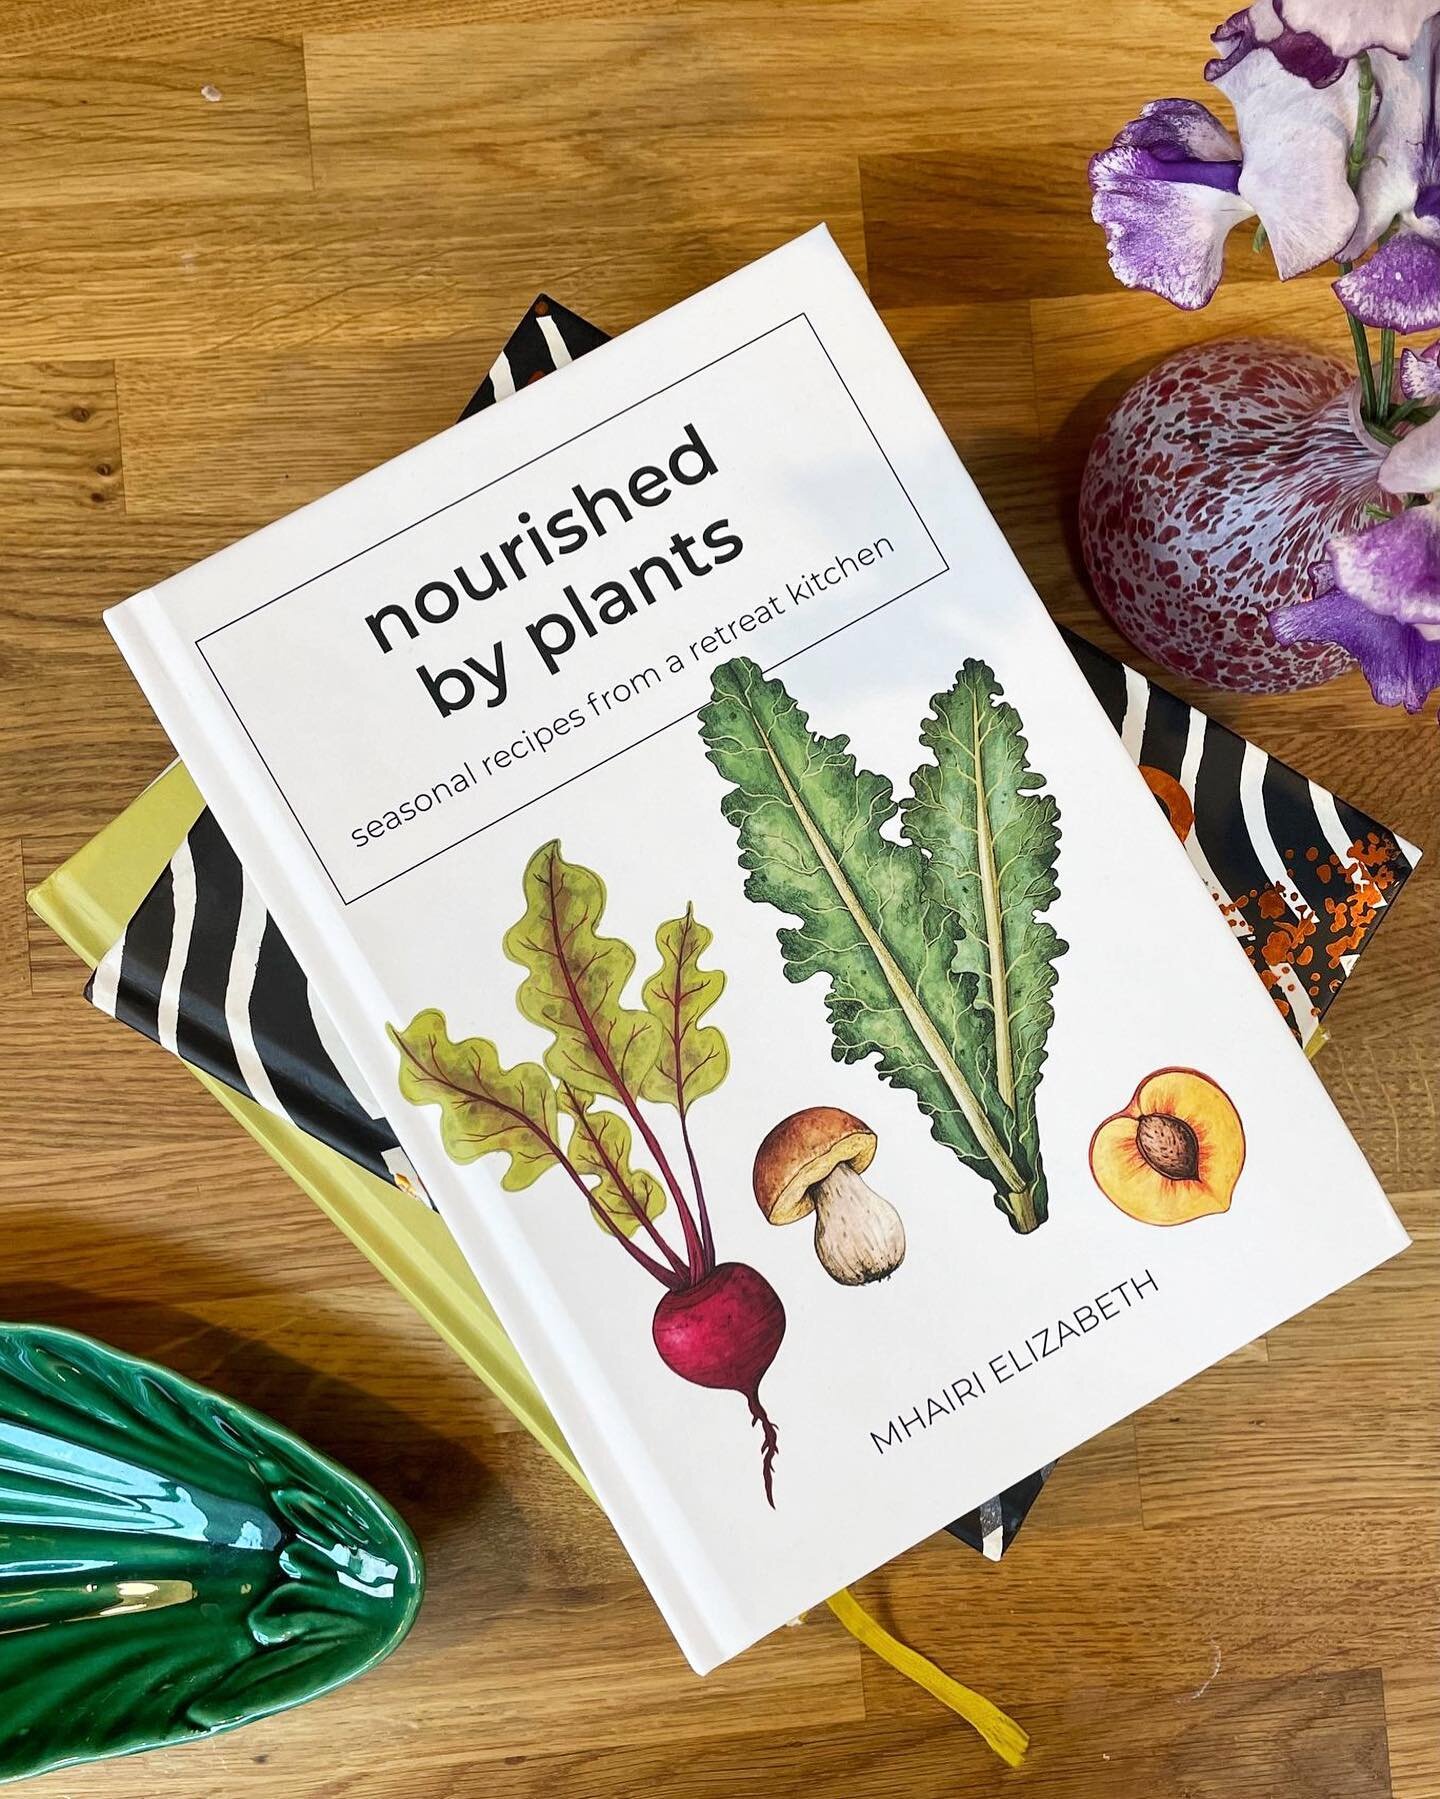 I WROTE A COOKBOOK 🌱

It&rsquo;s finally happened! I&rsquo;ve released my first self-published printed cookbook 🥰&hellip; its been a journey for sure! Will be happy to share more about the process in the future if folks are interested&hellip;.

So 